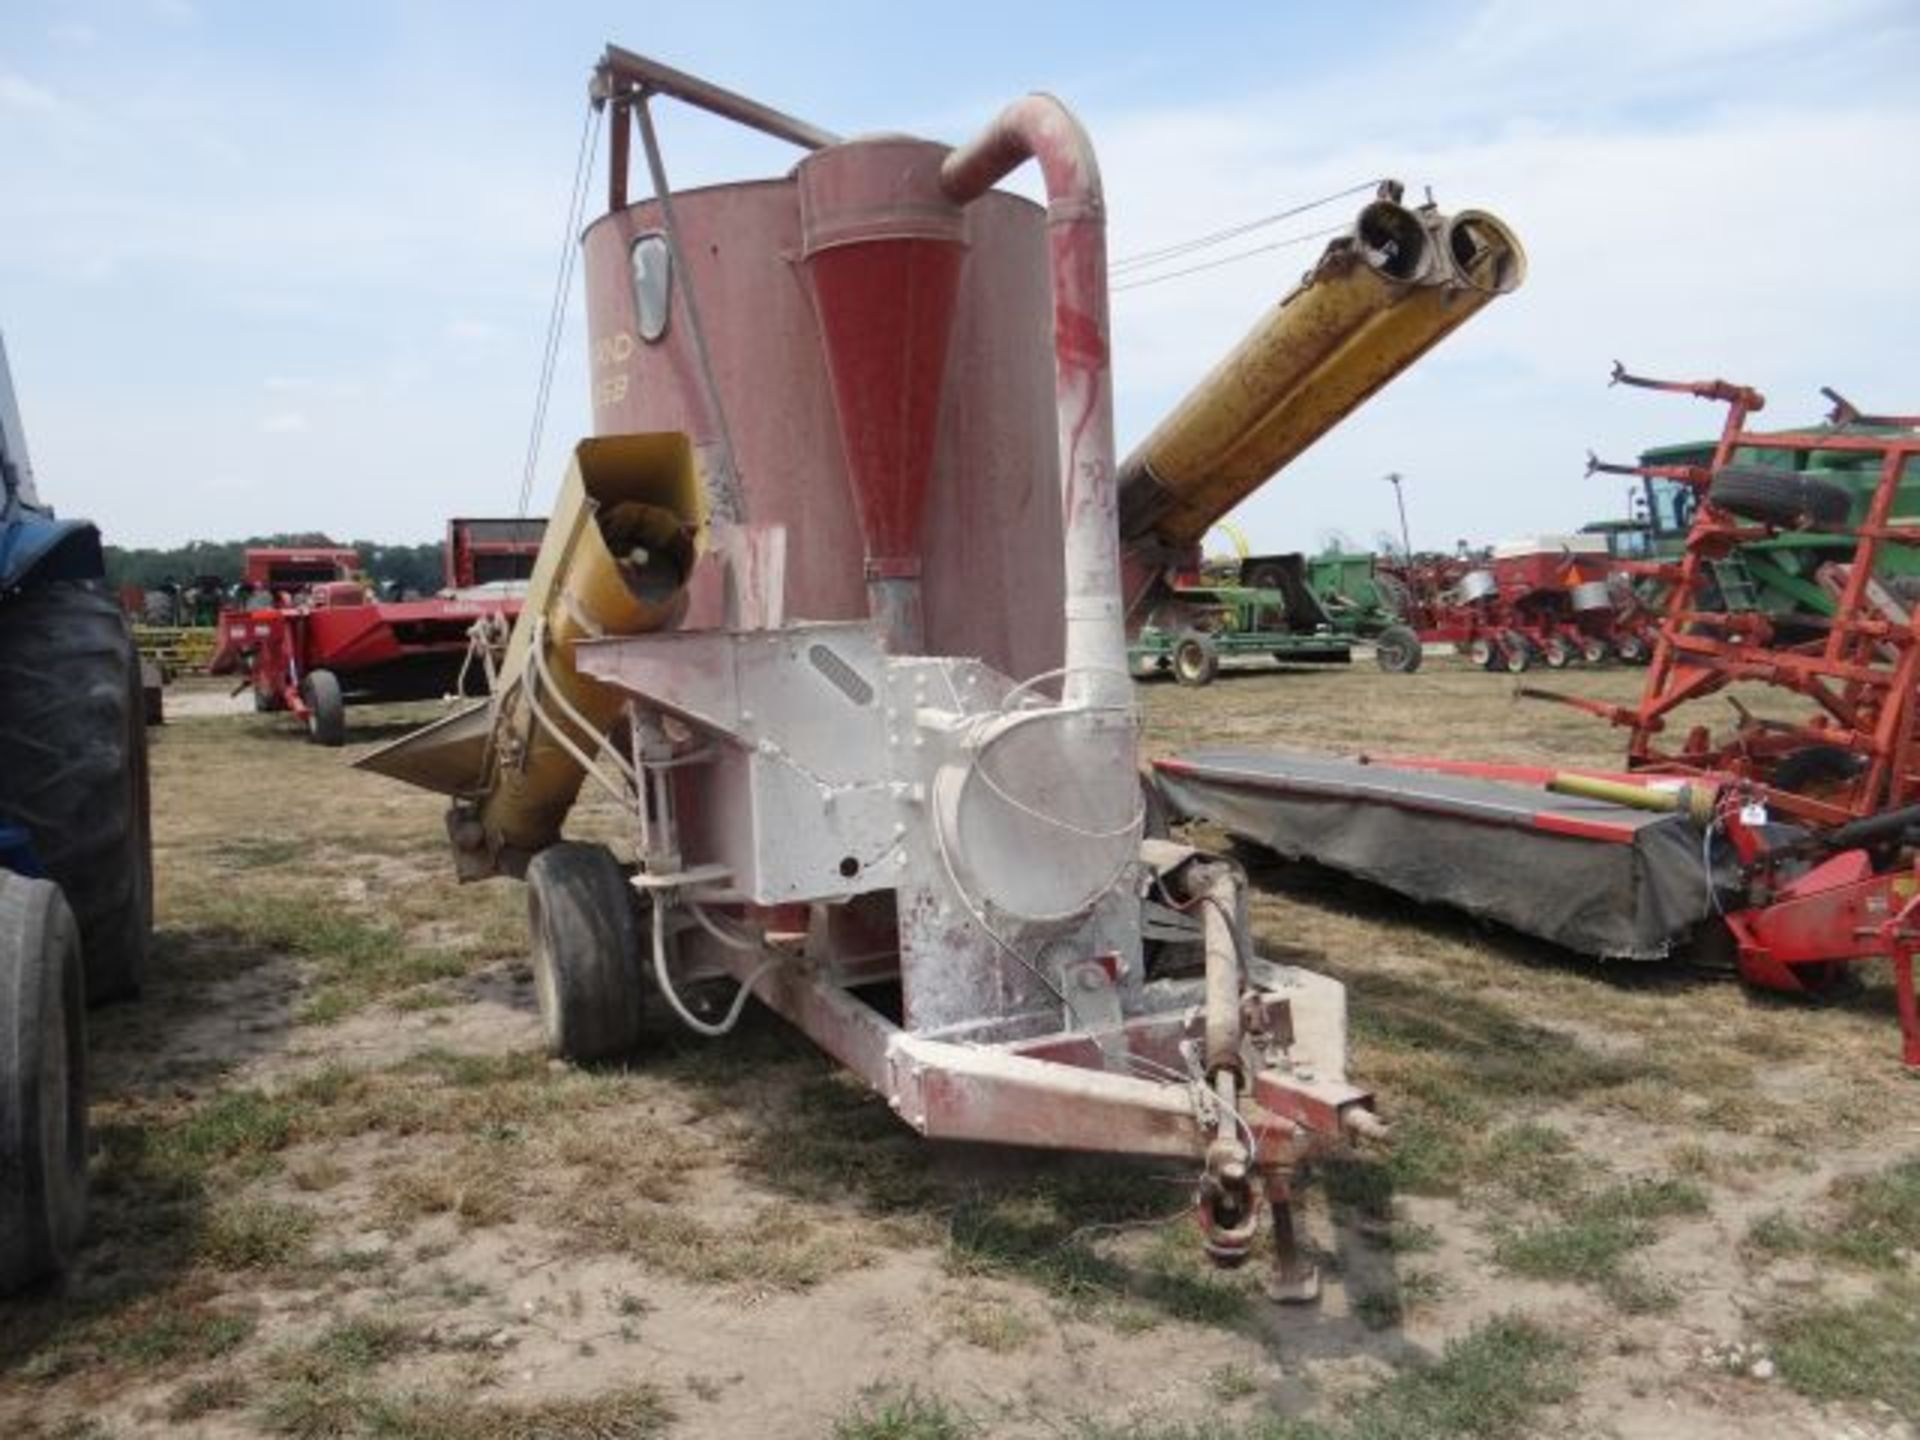 NH 358 Grinder Mixer Hyd Unload and Intake Augers, 540 PTO, Been Grinding Until Brought to the